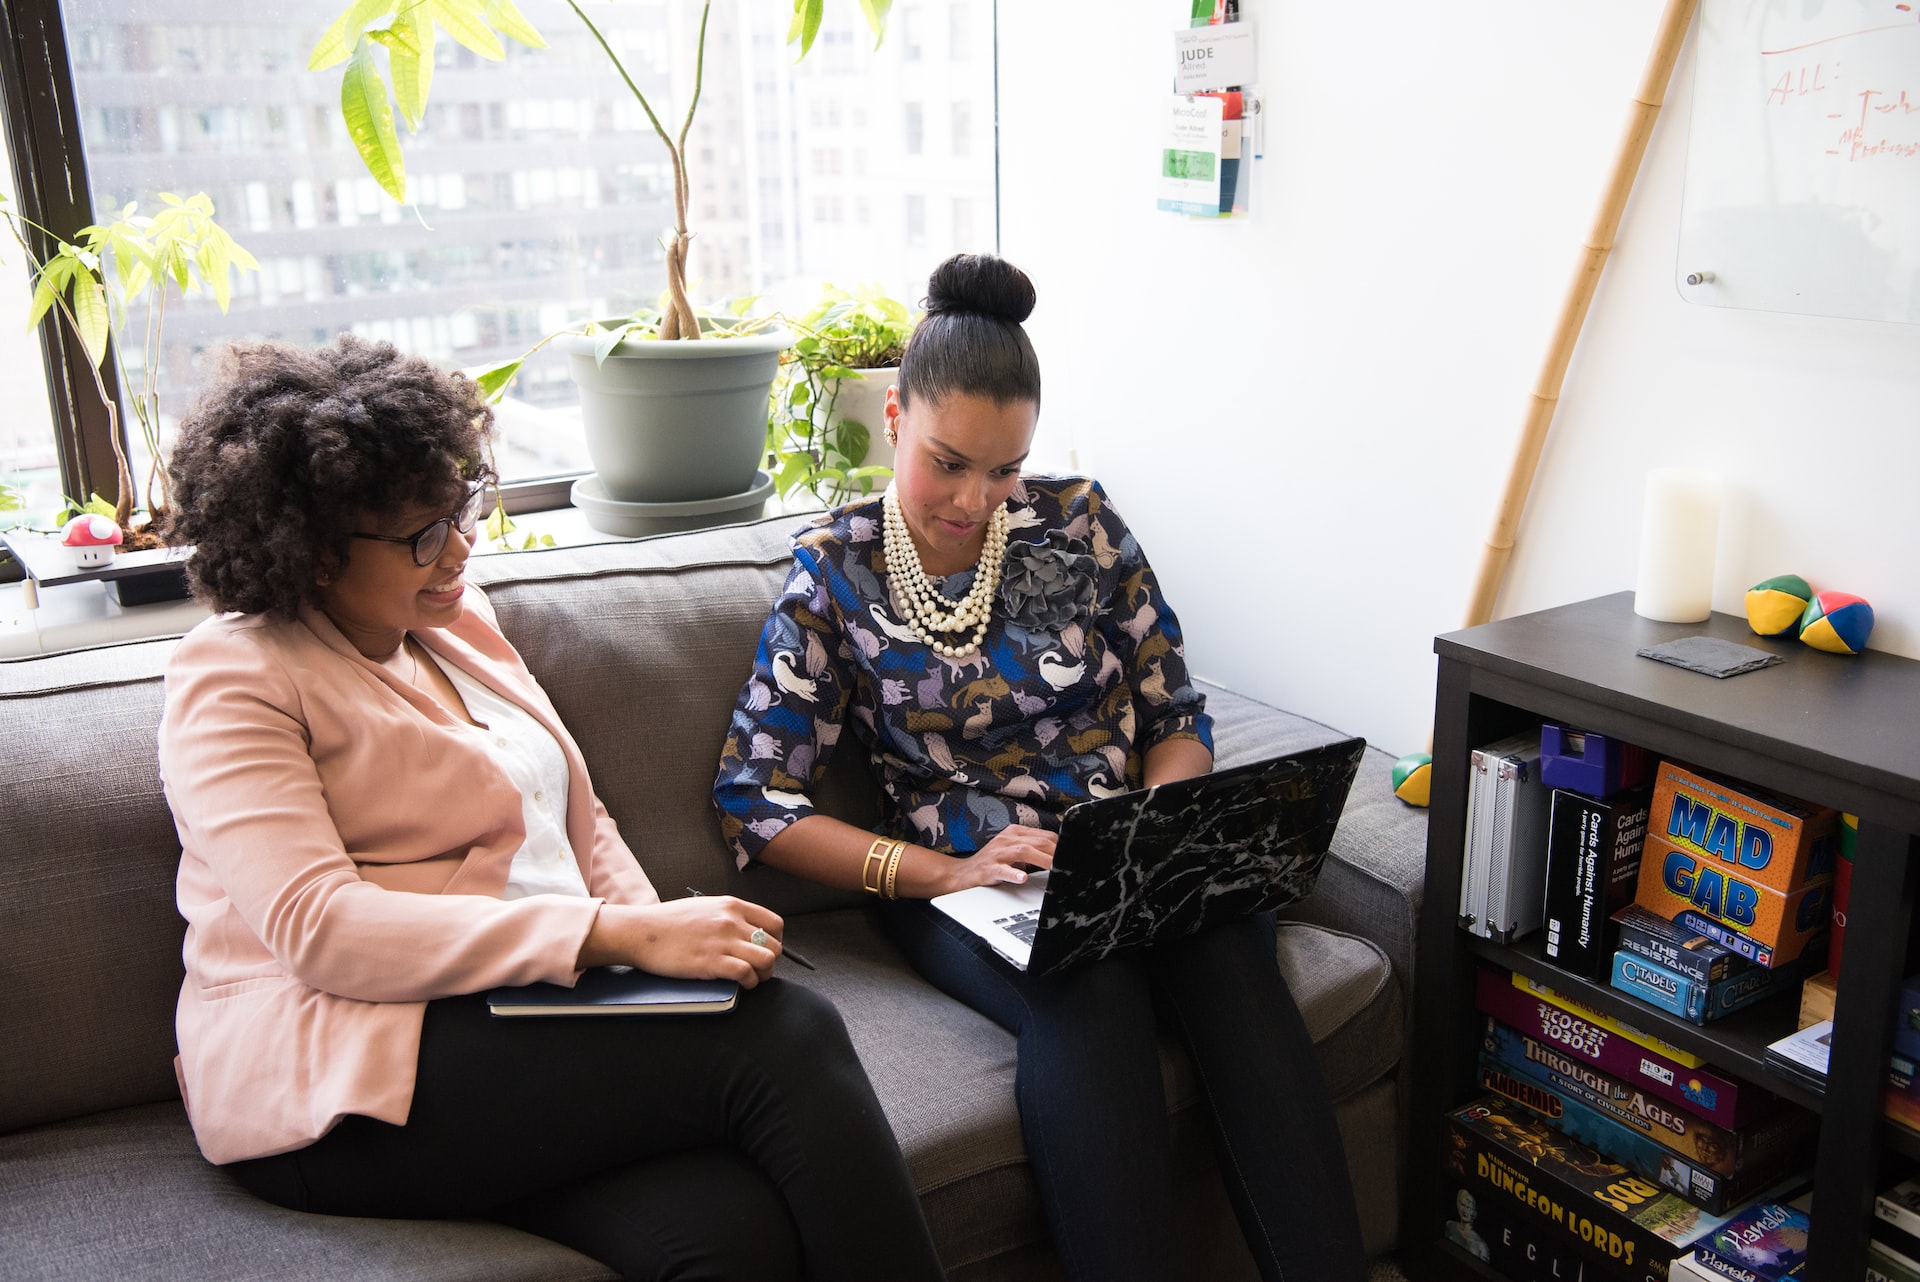 Two professional black women sitting on a couch in an office and looking at a laptop